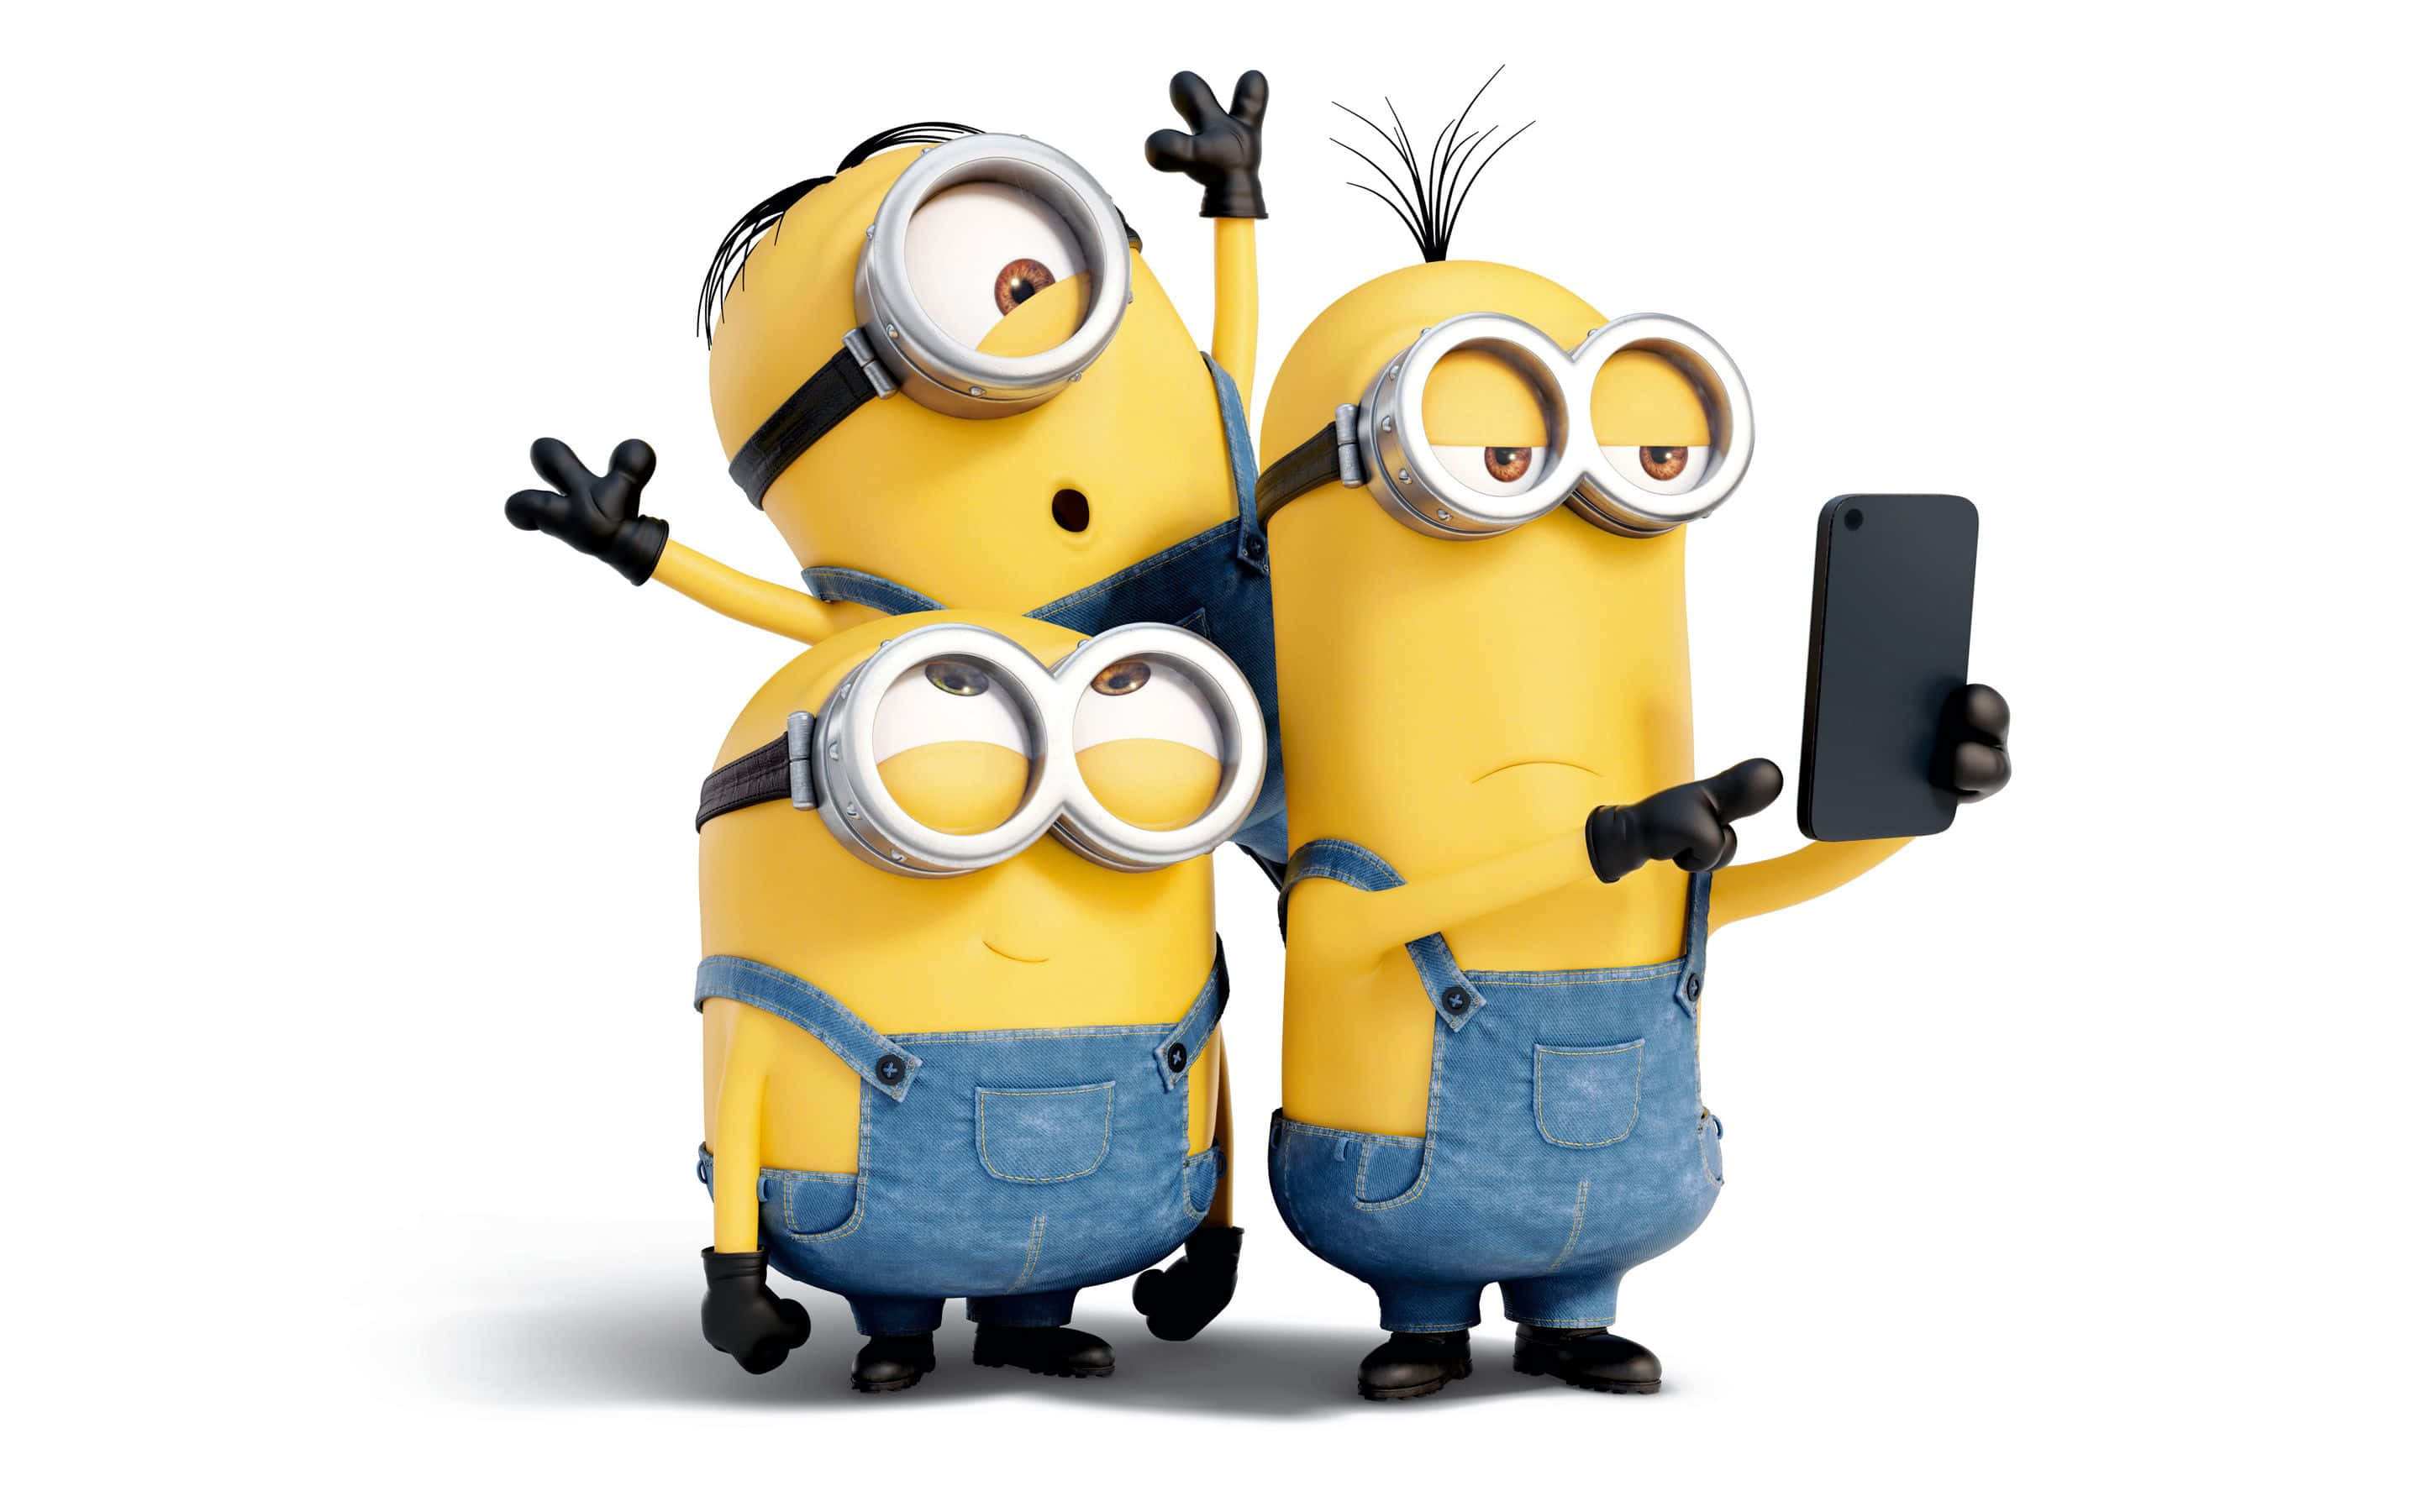 Download Description- Three Minions from the popular Despicable Me  franchise standing side by side, dressed up in colorful overalls with  smiling faces full of mischief.